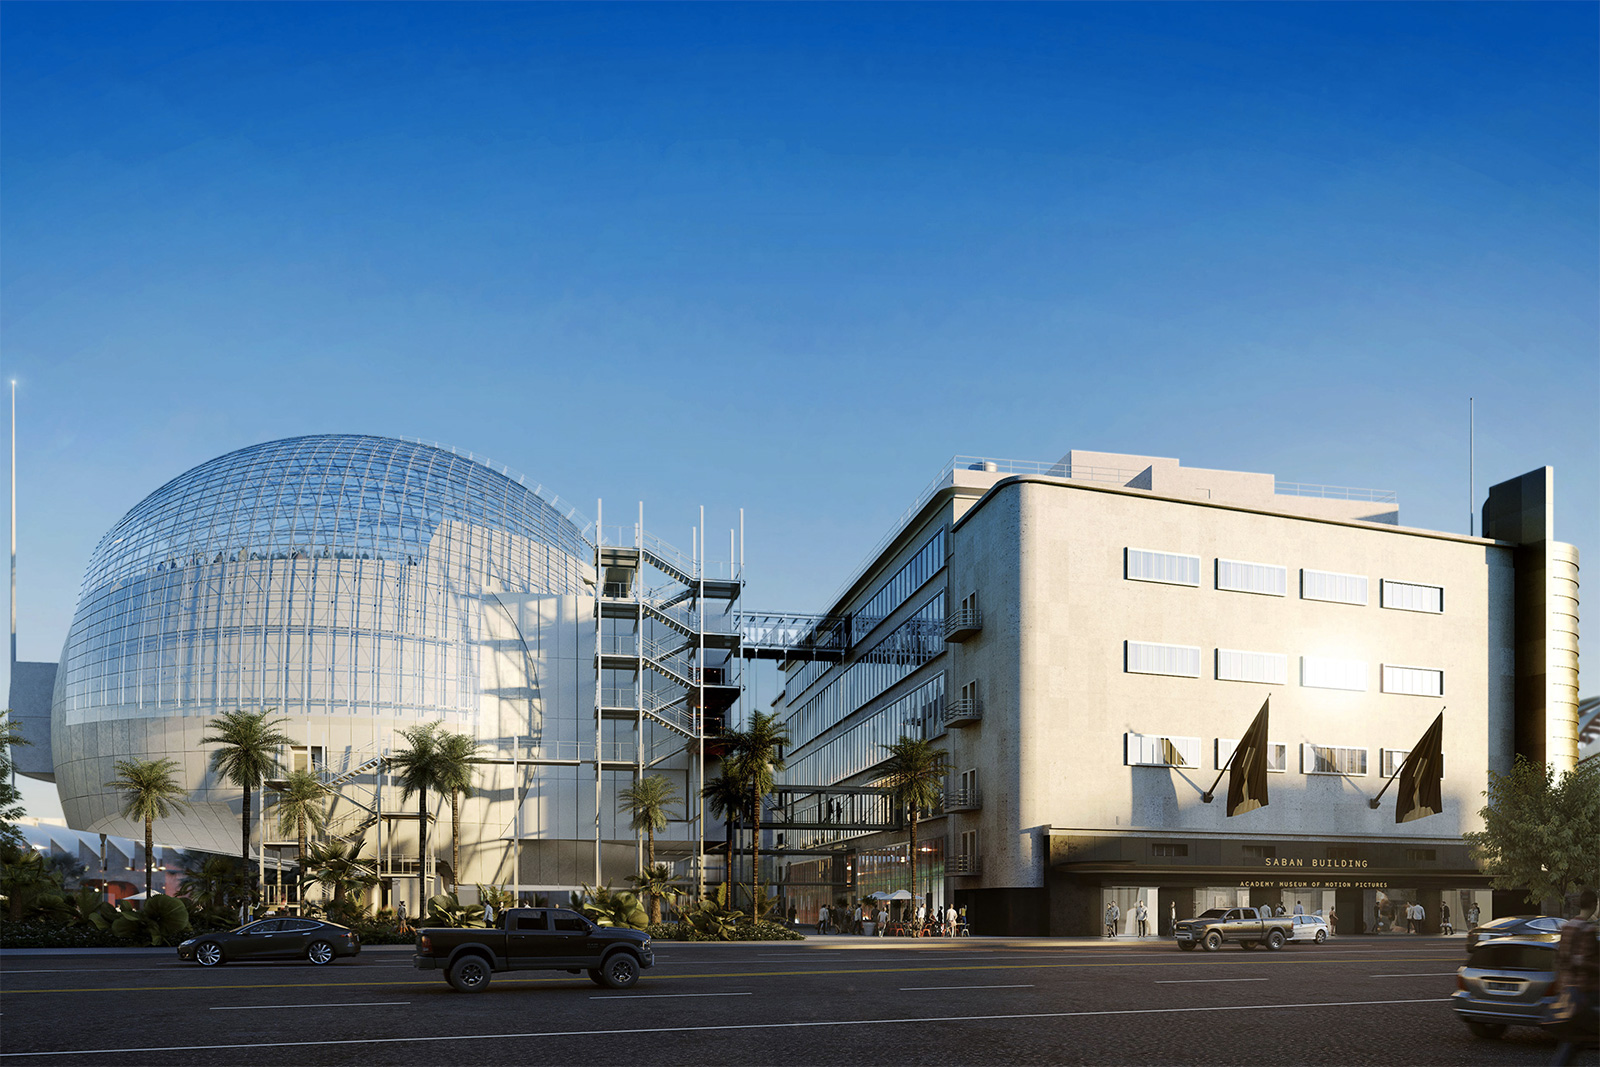 11 new museums opening in 2019: Academy Museum in Los Angeles